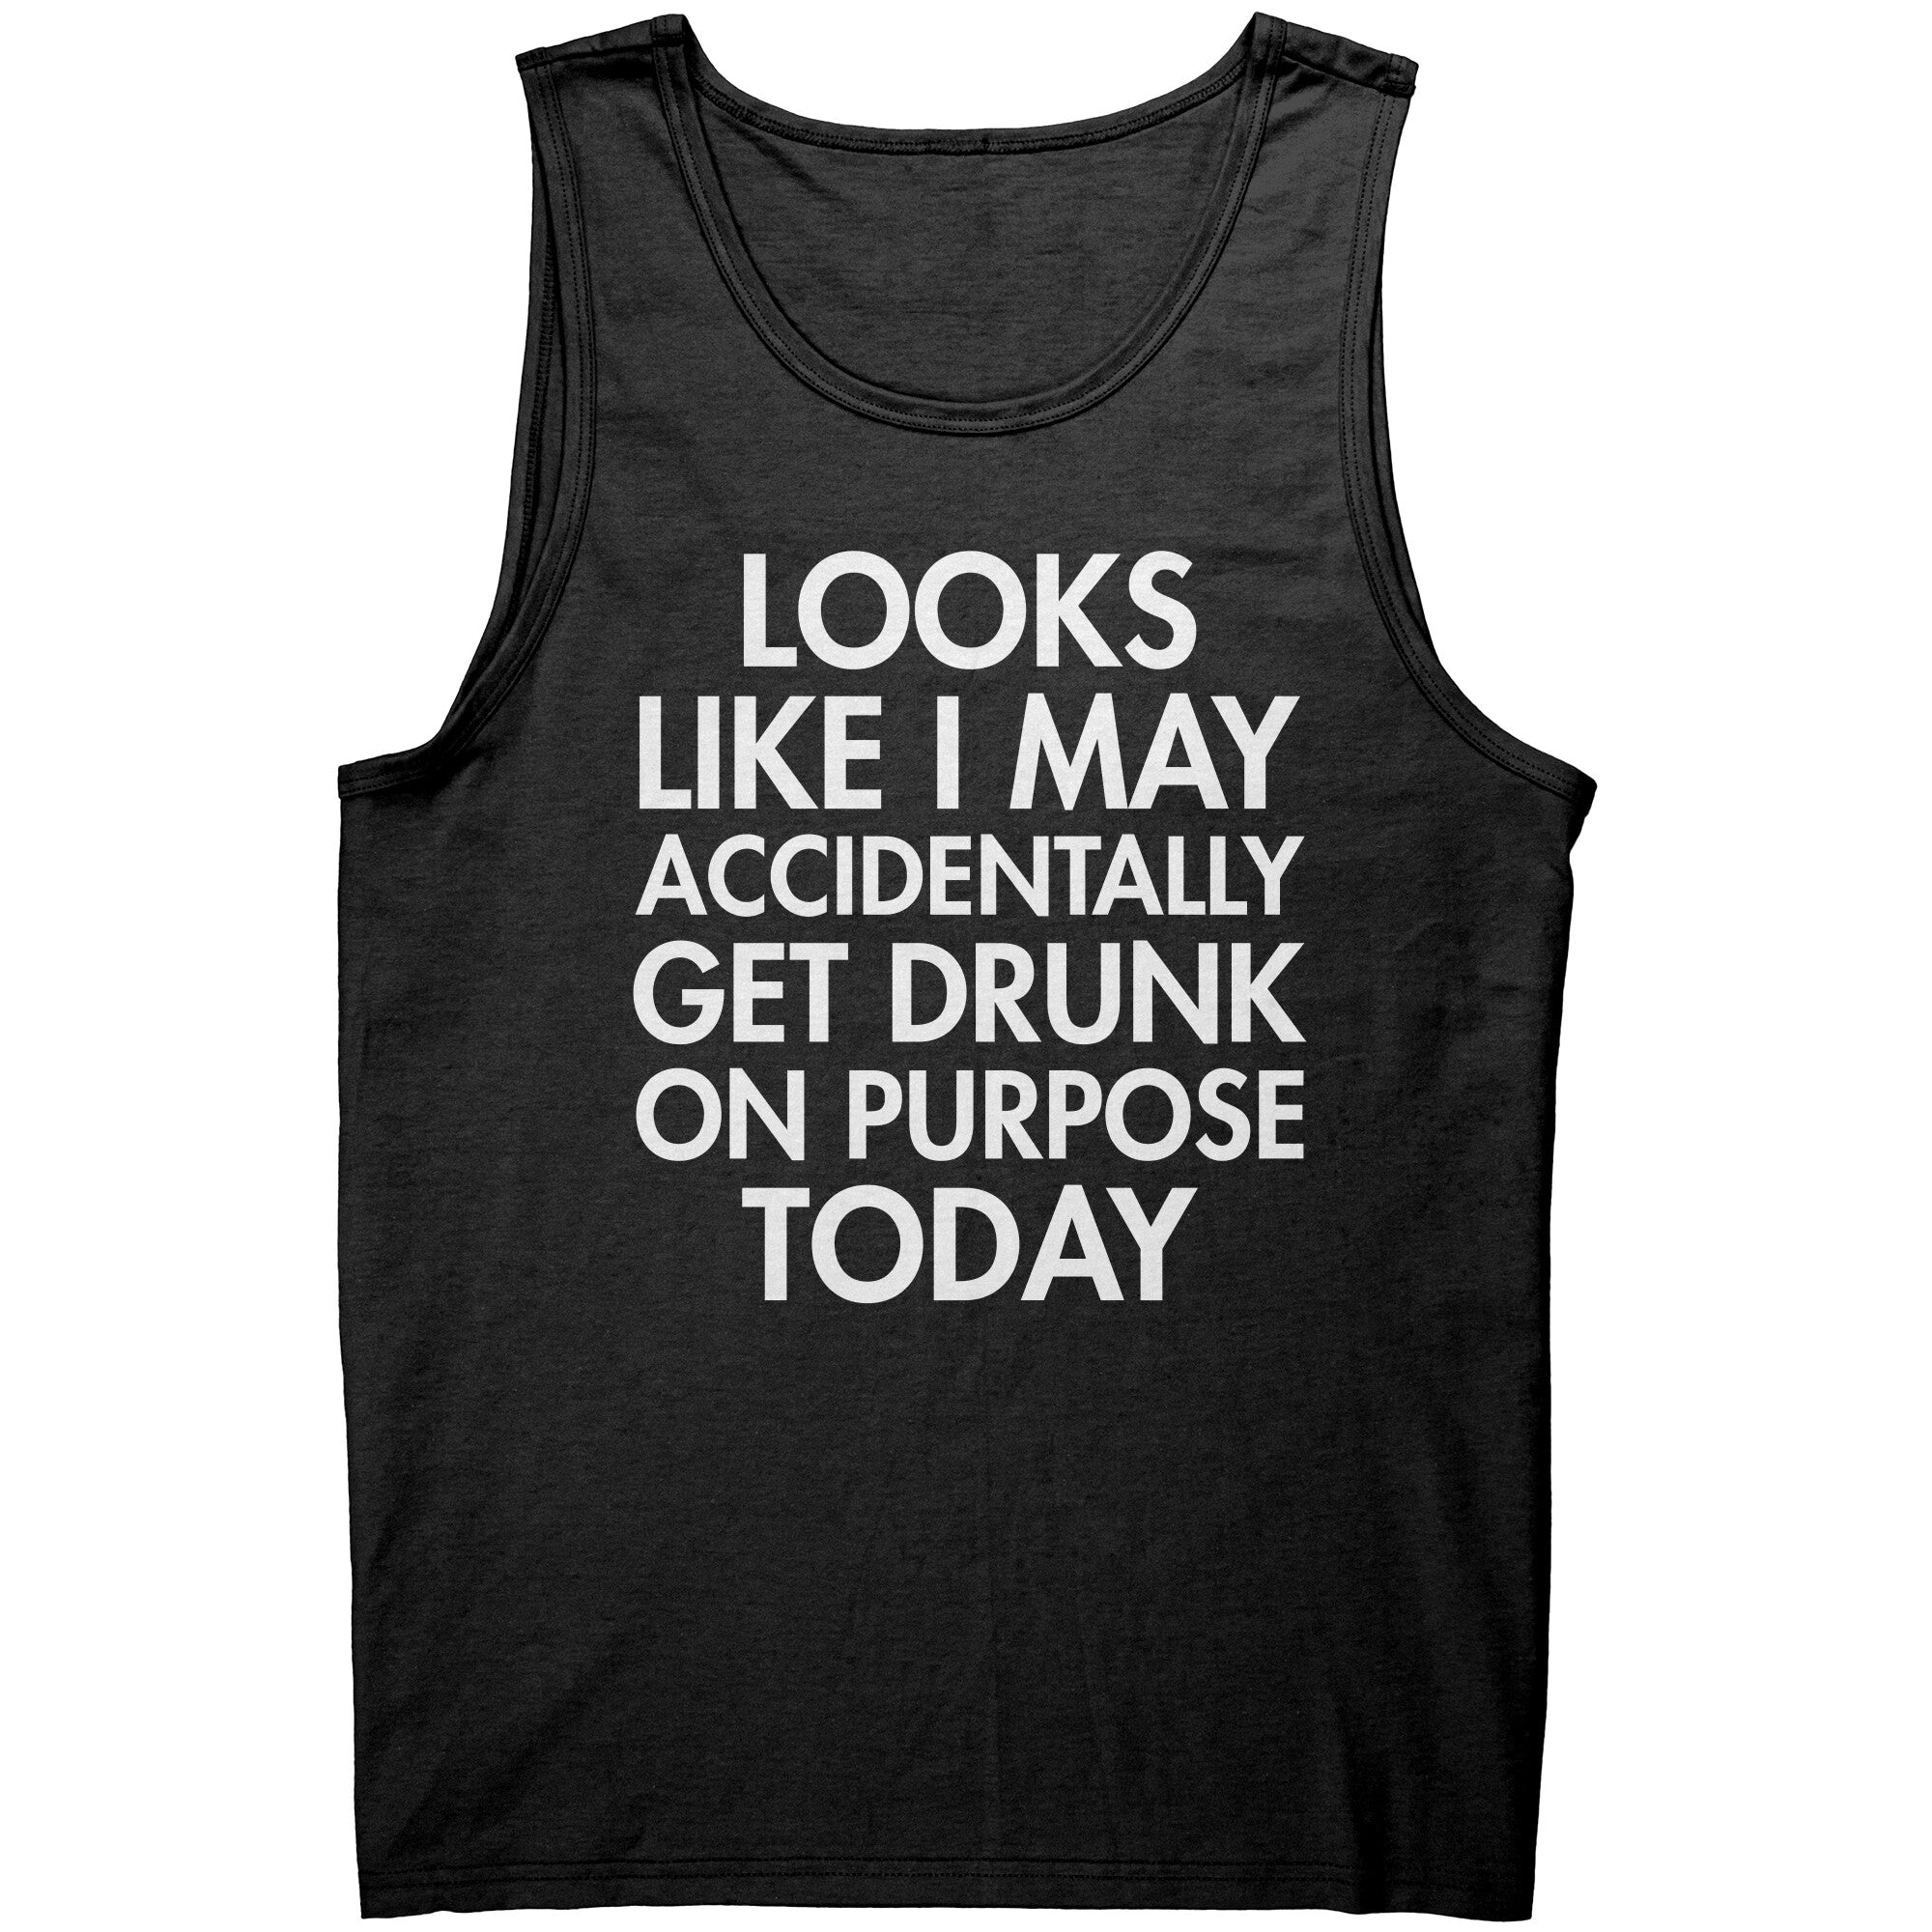 Looks Like I May Accidentally Get Drunk On Purpose Today -Apparel | Drunk America 